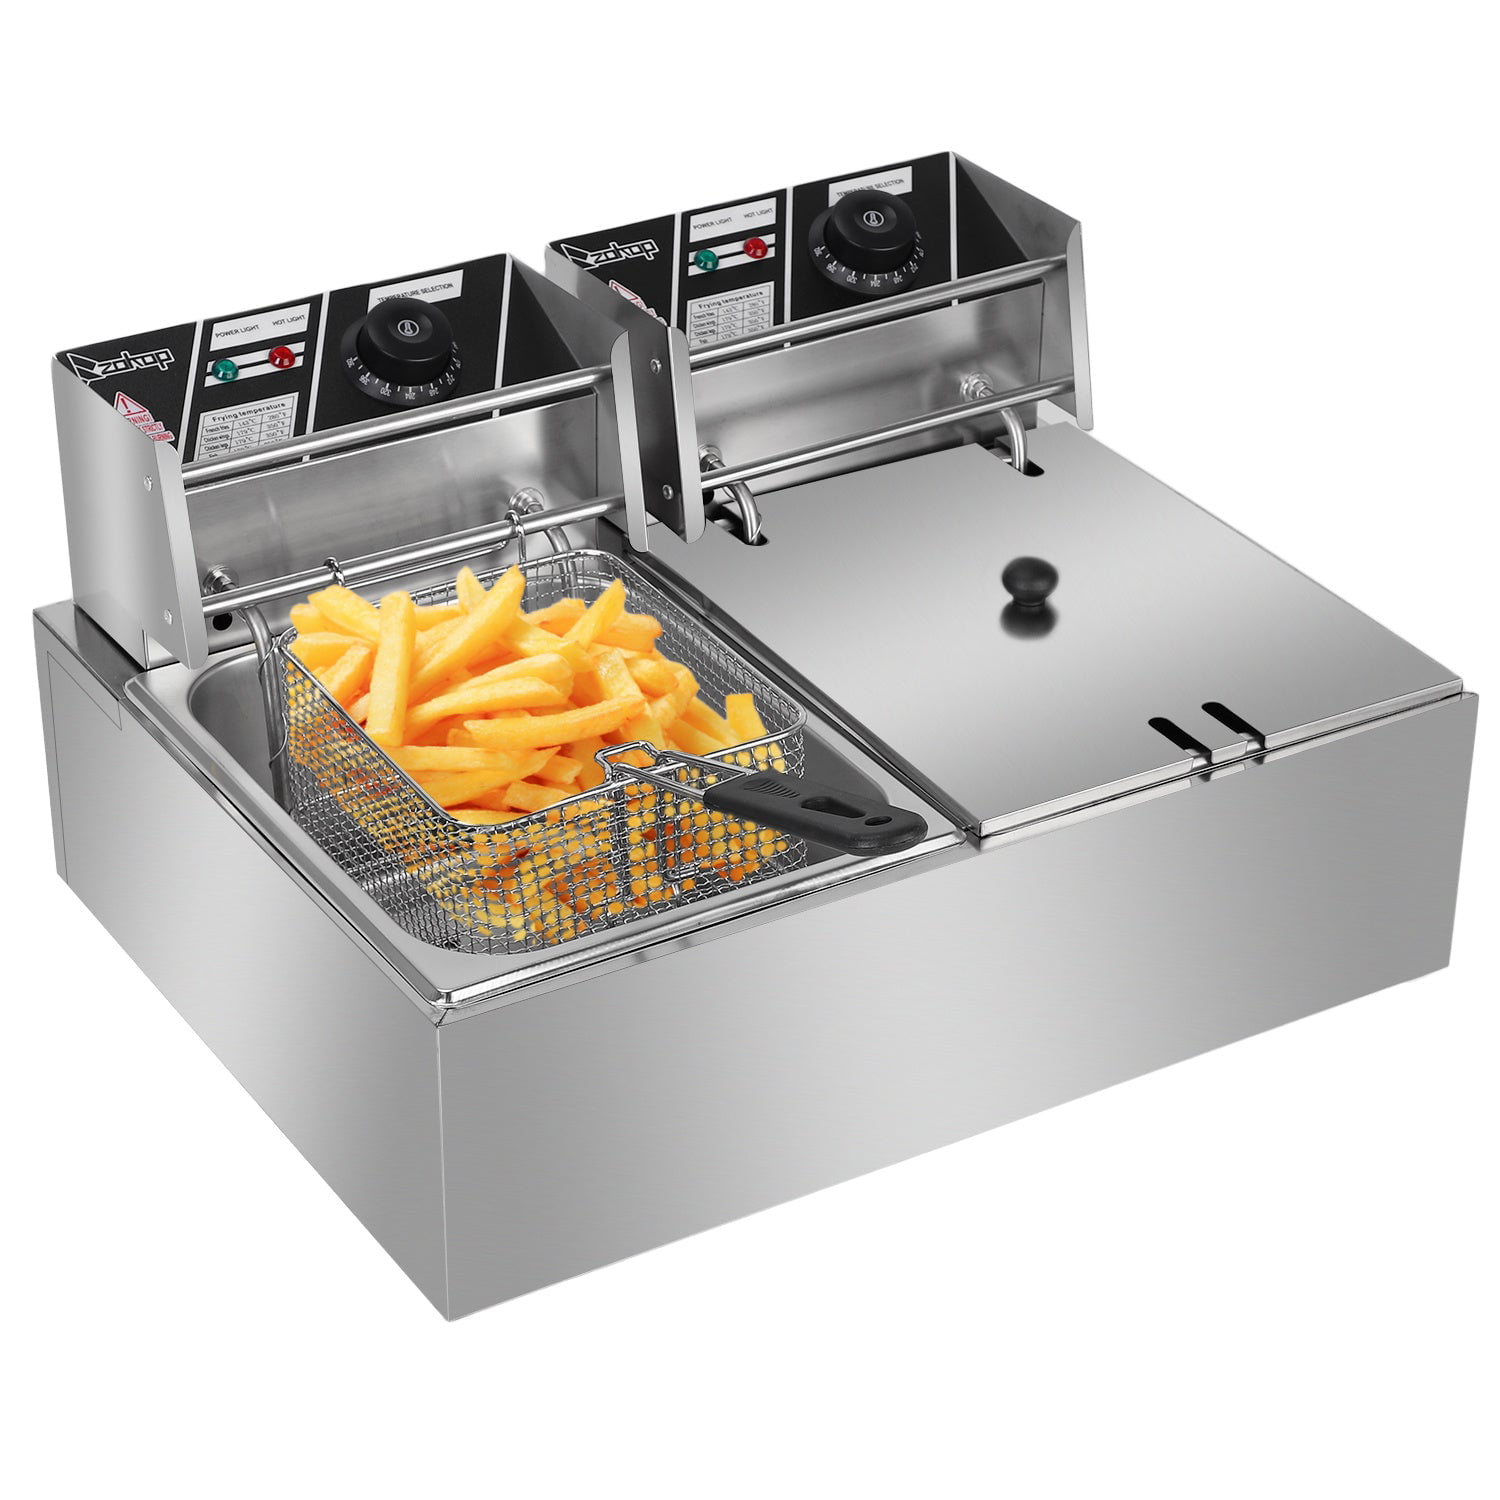 French Fries 12L Electric Deep Fryer with Basket Lid 3400W stainless steel Countertop Kitchen Frying Machine Turkey Donuts and More 